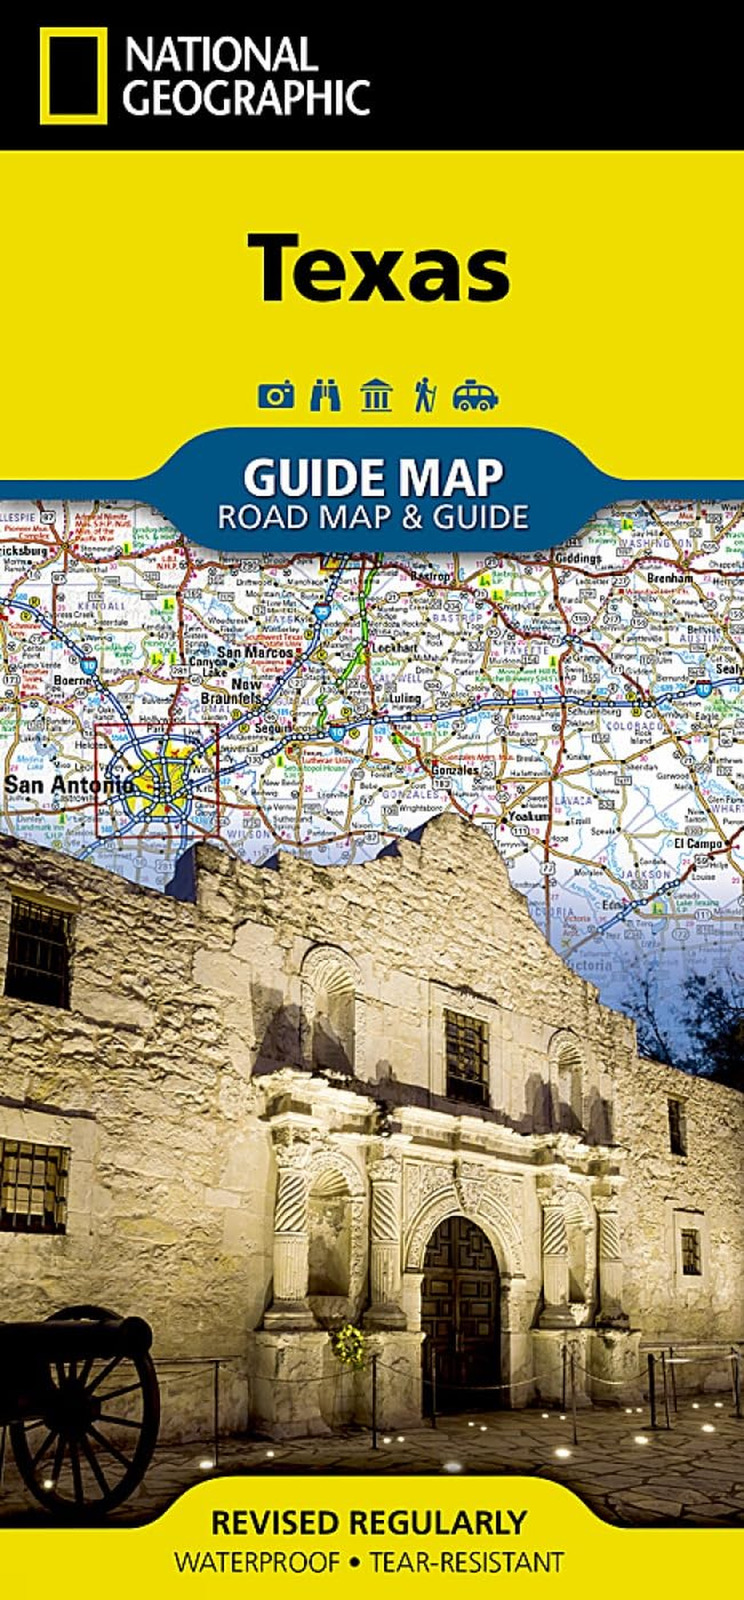 Texas Map (National Geographic Guide Map) - NEW